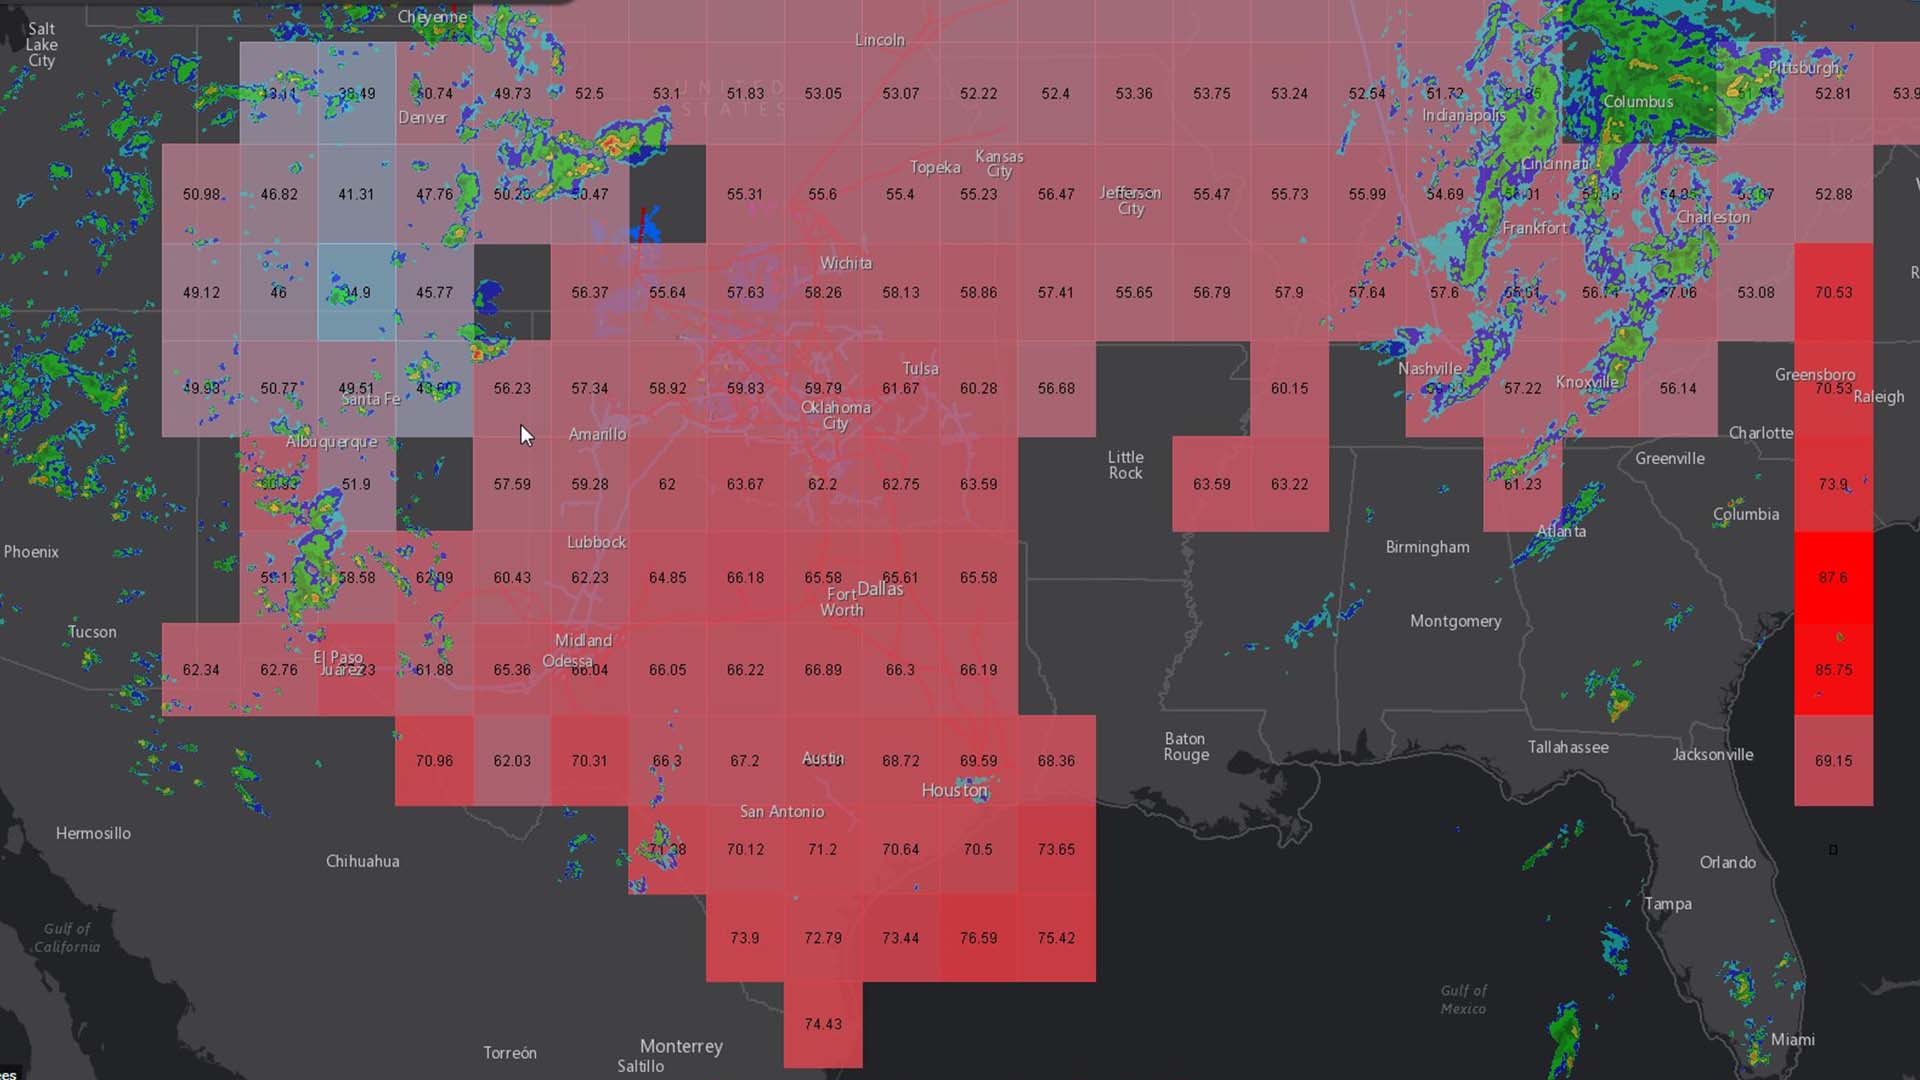 Historical weather analysis across the country, predictive analytics